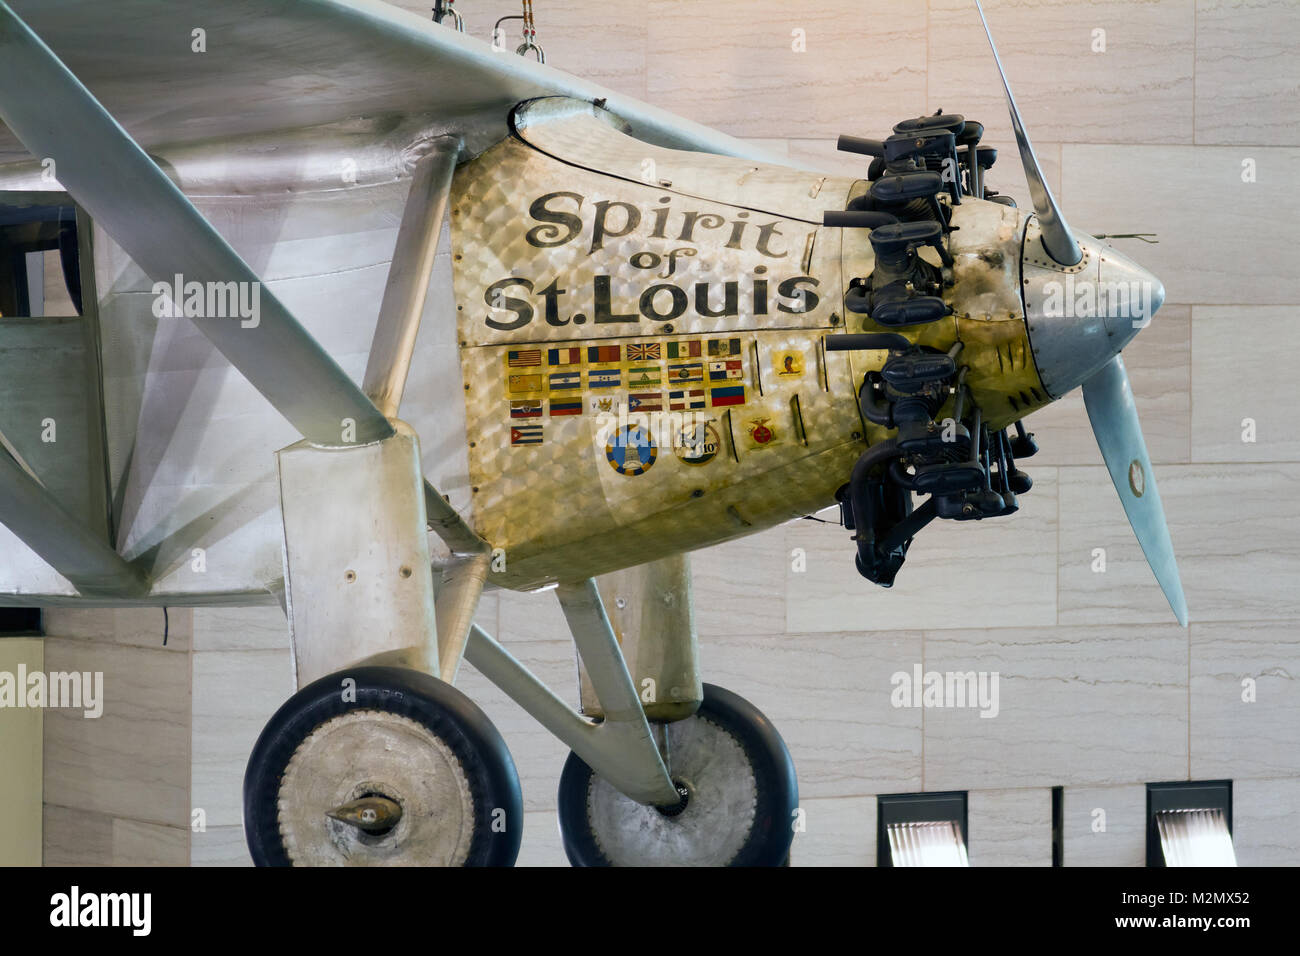 WASHINGTON D.C., USA - MAY 11, 2016: Spirit of St Louis aircraft, Charles Lindbergh at the Smithsonian National Air and Space Museum in Washington D.C Stock Photo